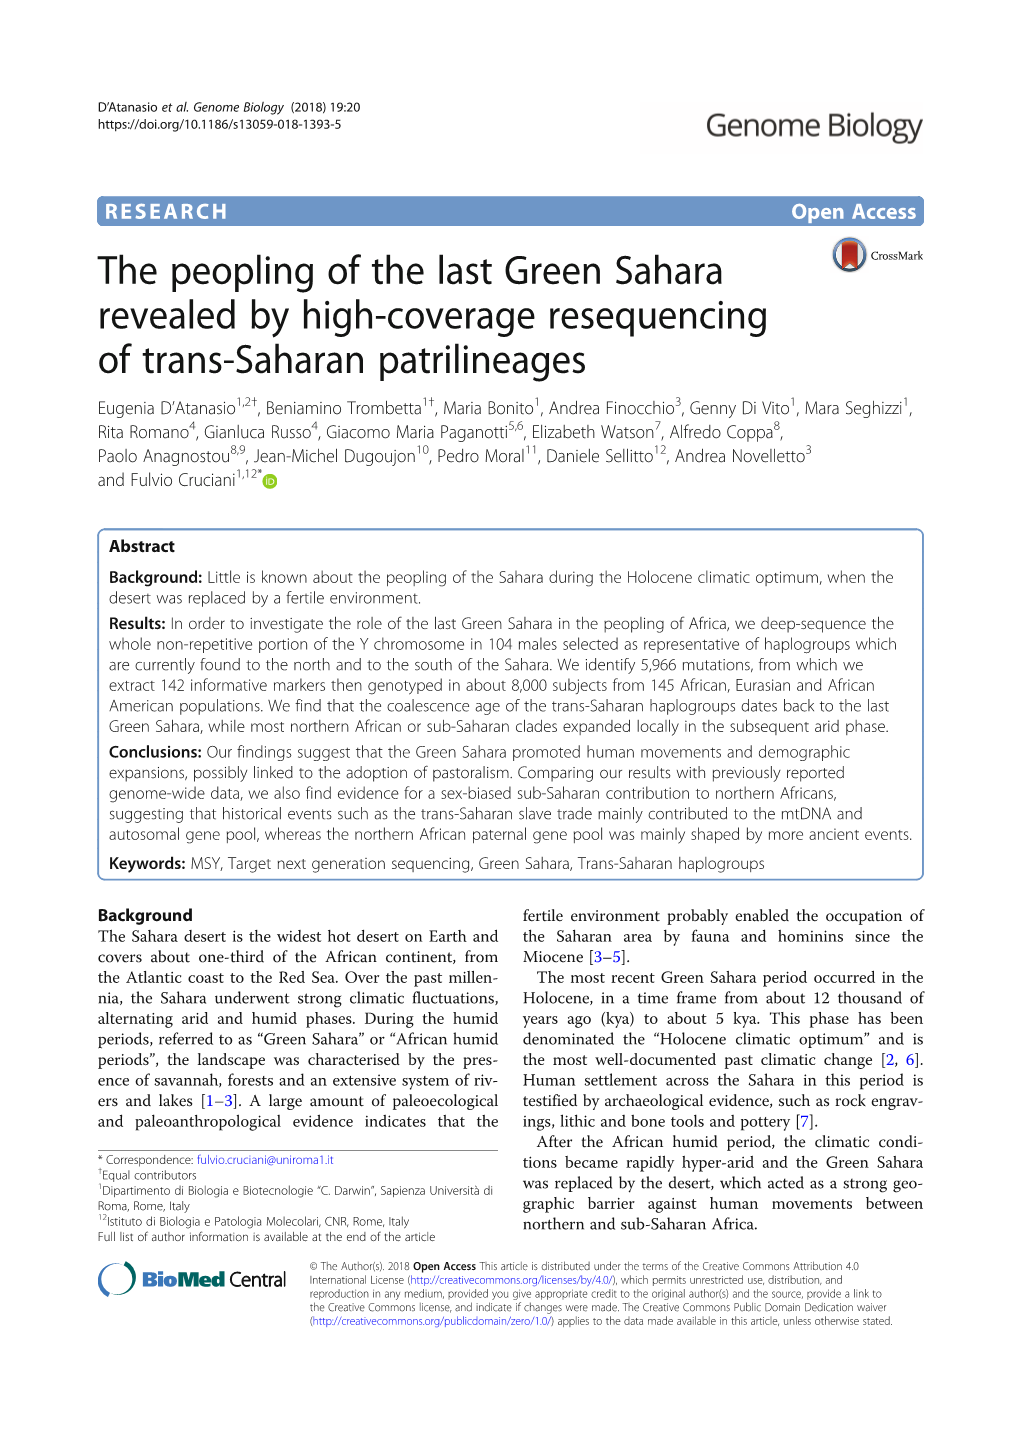 The Peopling of the Last Green Sahara Revealed by High